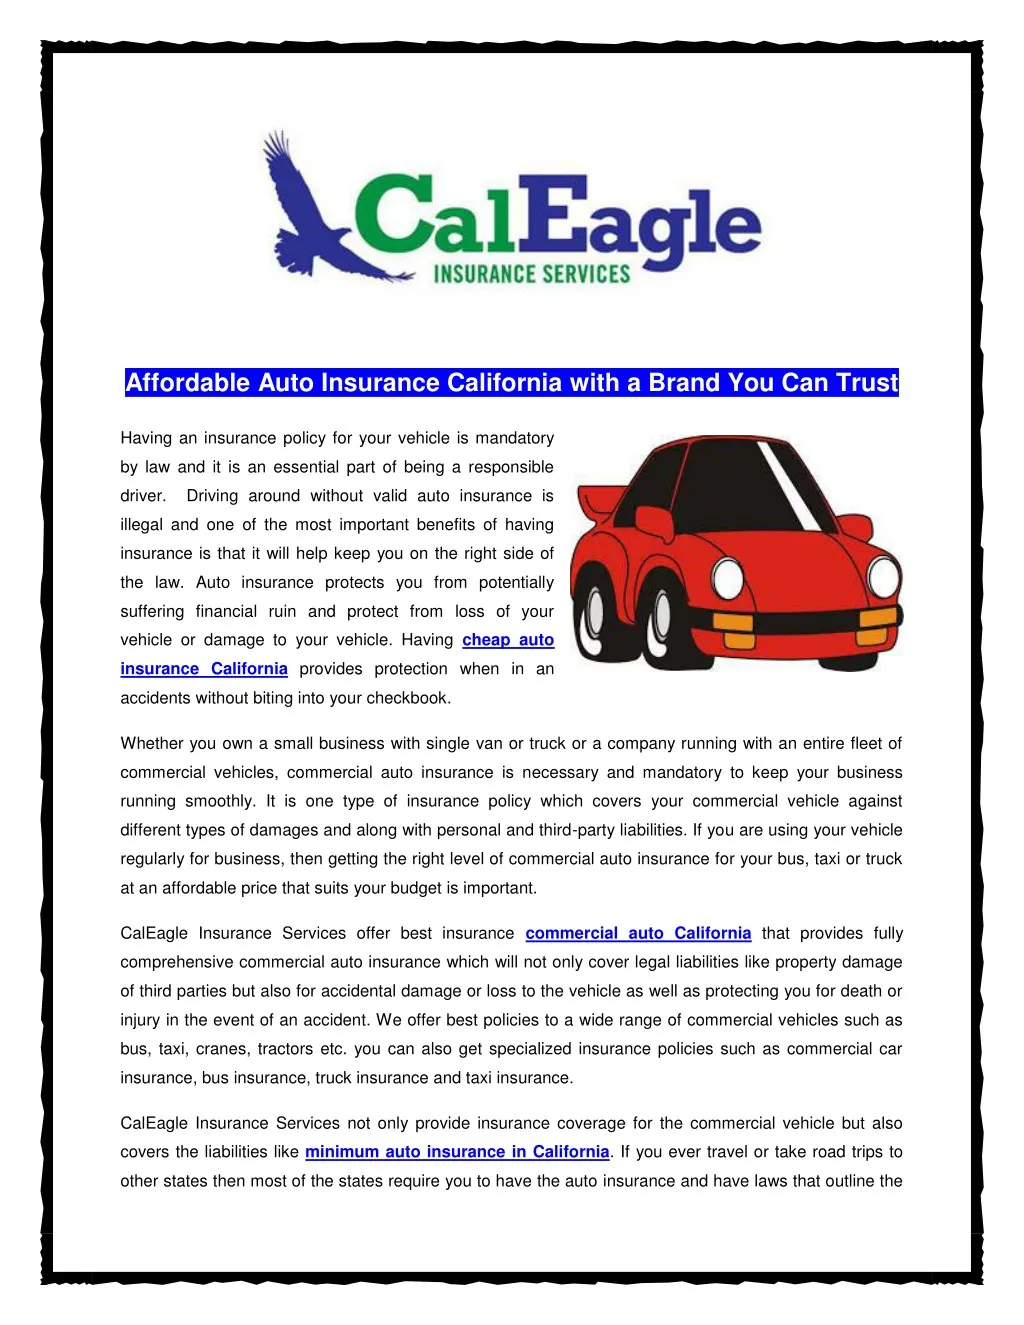 PPT Affordable Auto Insurance California with a Brand